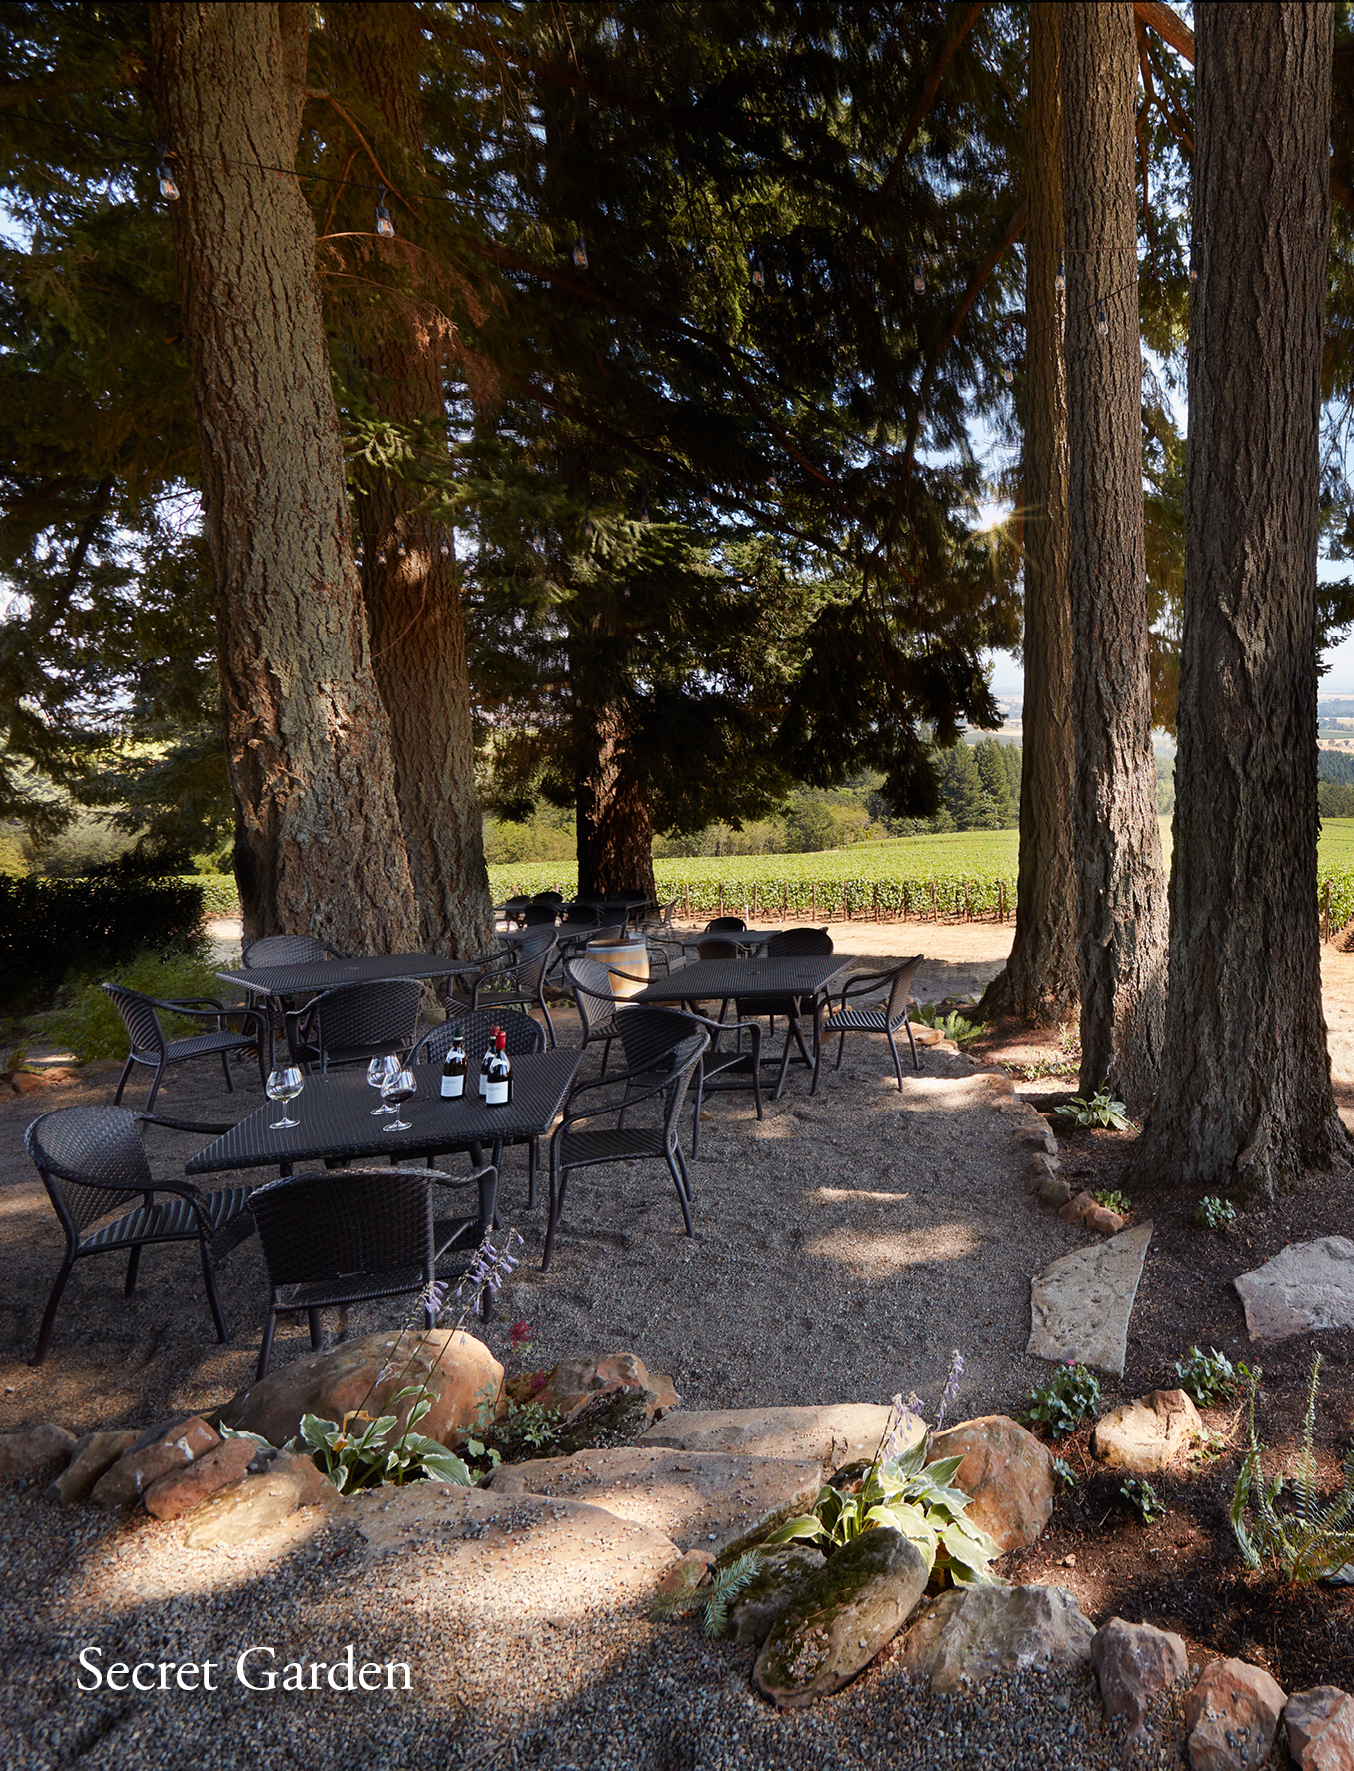 Outdoor tasting area called the Secret Garden at Domaine Drouhin